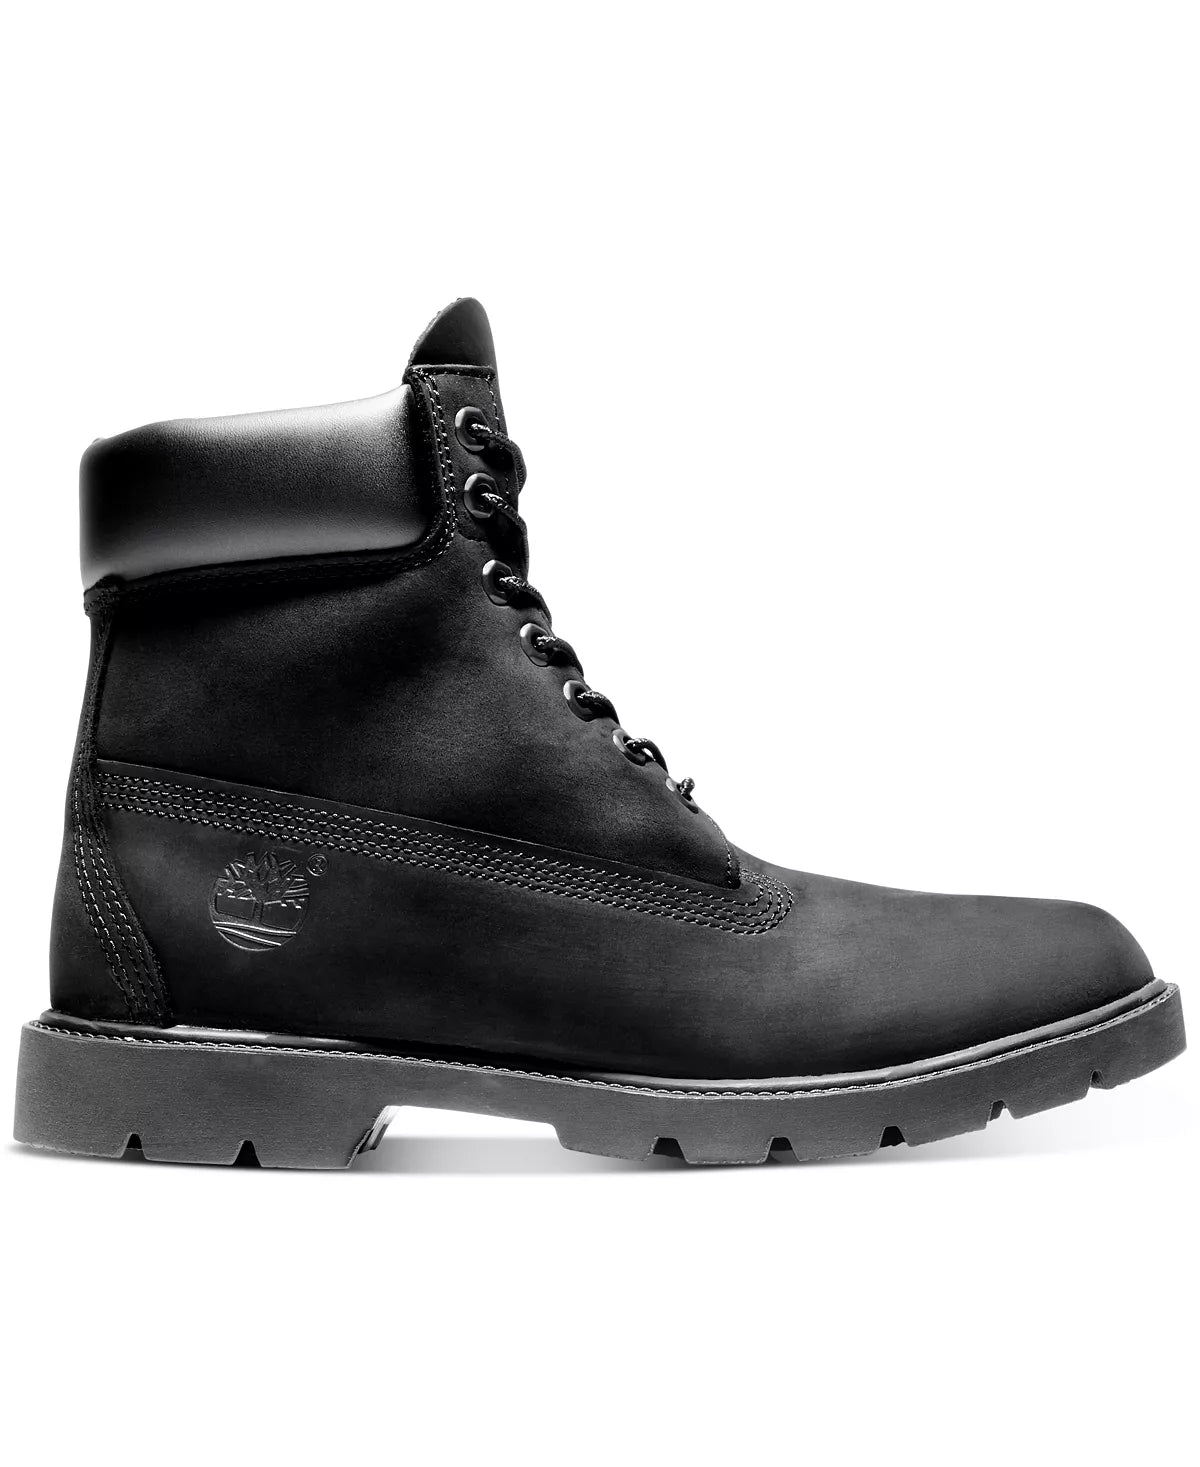 Timberland Men's 6-Inch Basic Waterproof Boots - Black side view of boot